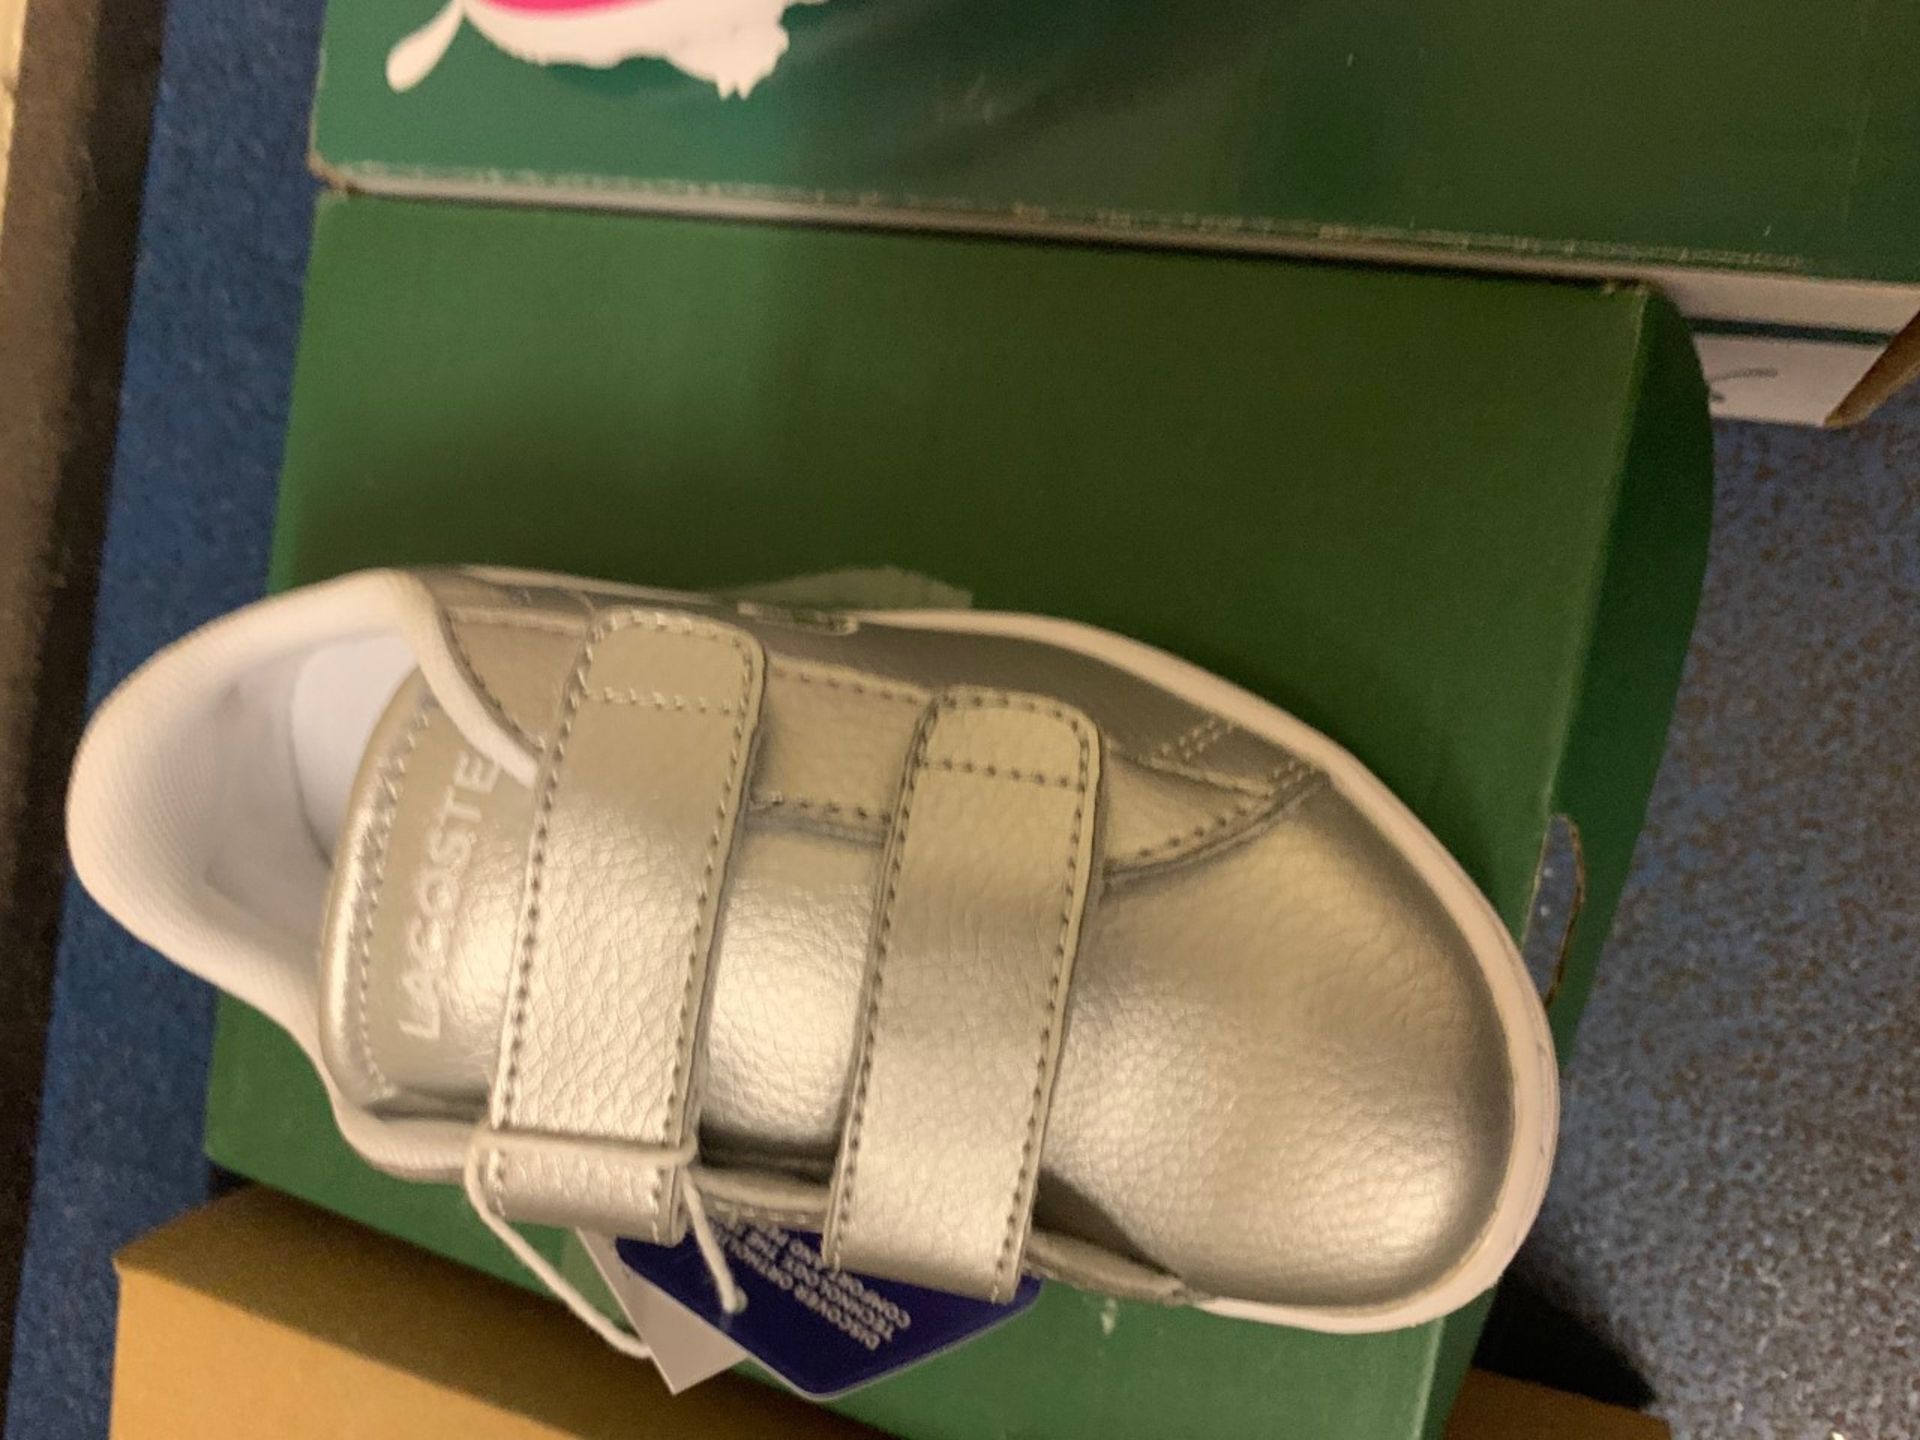 NEW & BOXED LACOSTE SILVER TRAINER SIZE INFANT 9 (305/21) - Image 2 of 2